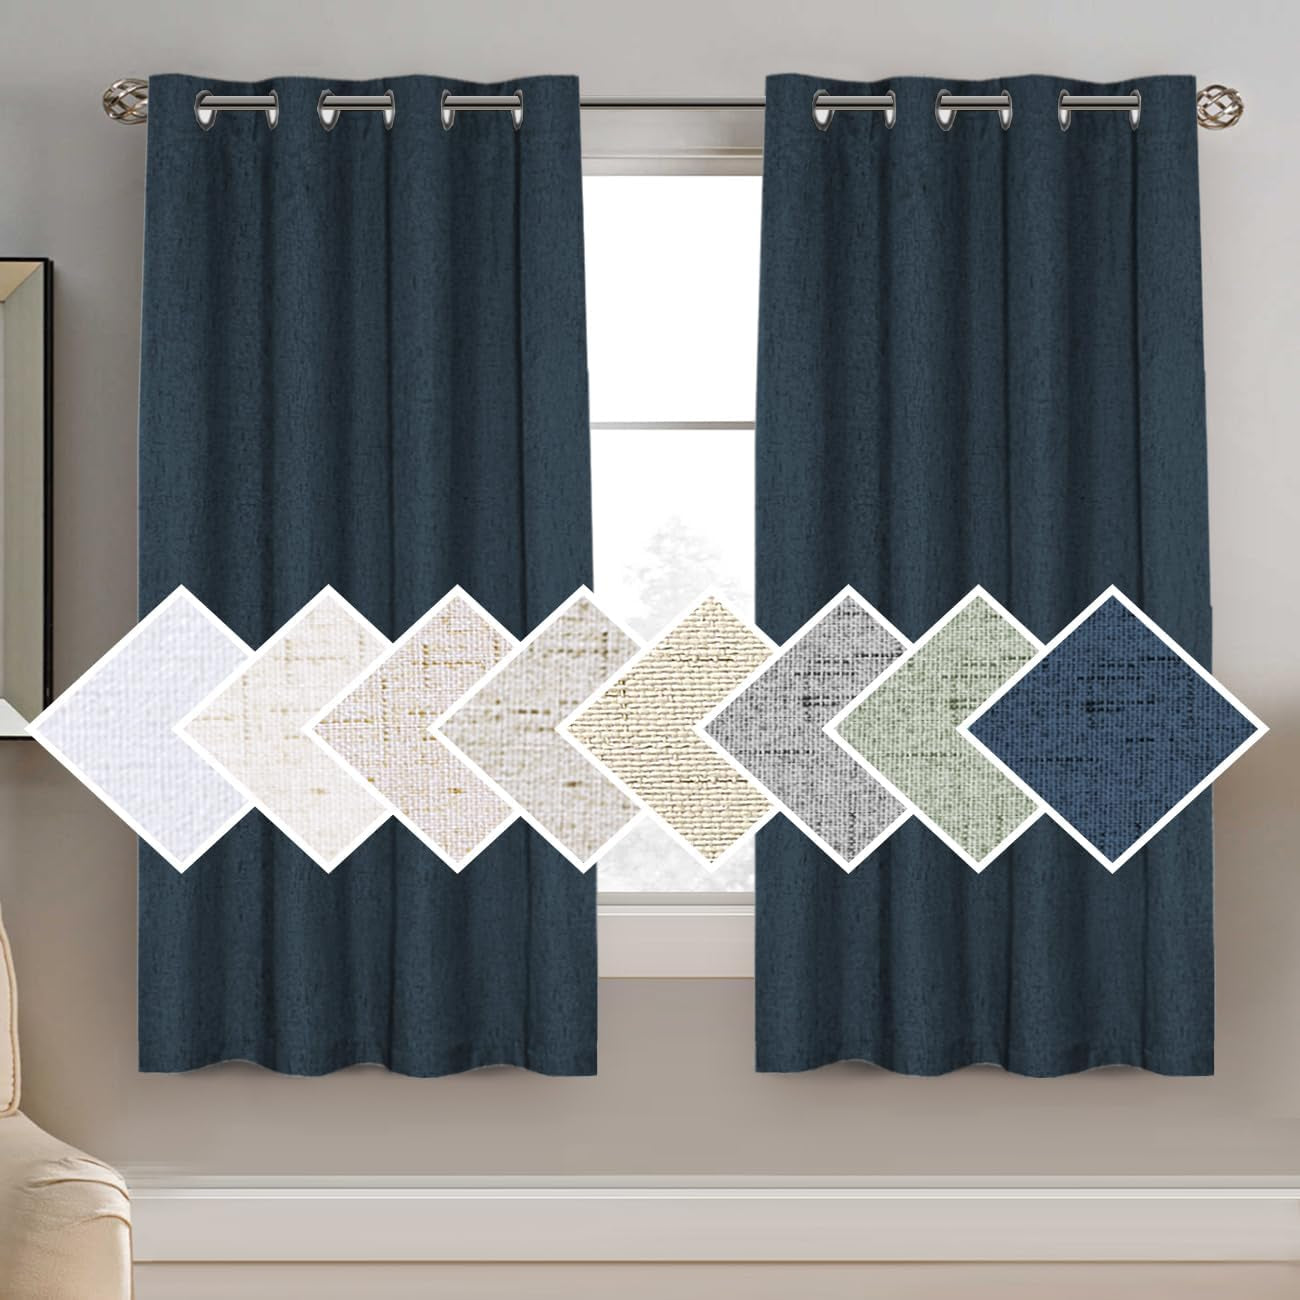 H.VERSAILTEX 100% Blackout Curtains for Bedroom Thermal Insulated Linen Textured Curtains Heat and Full Light Blocking Drapes Living Room Curtains 2 Panel Sets, 52X84 - Inch, Natural  H.VERSAILTEX Navy 1 Panel - 52"W X 63"L 